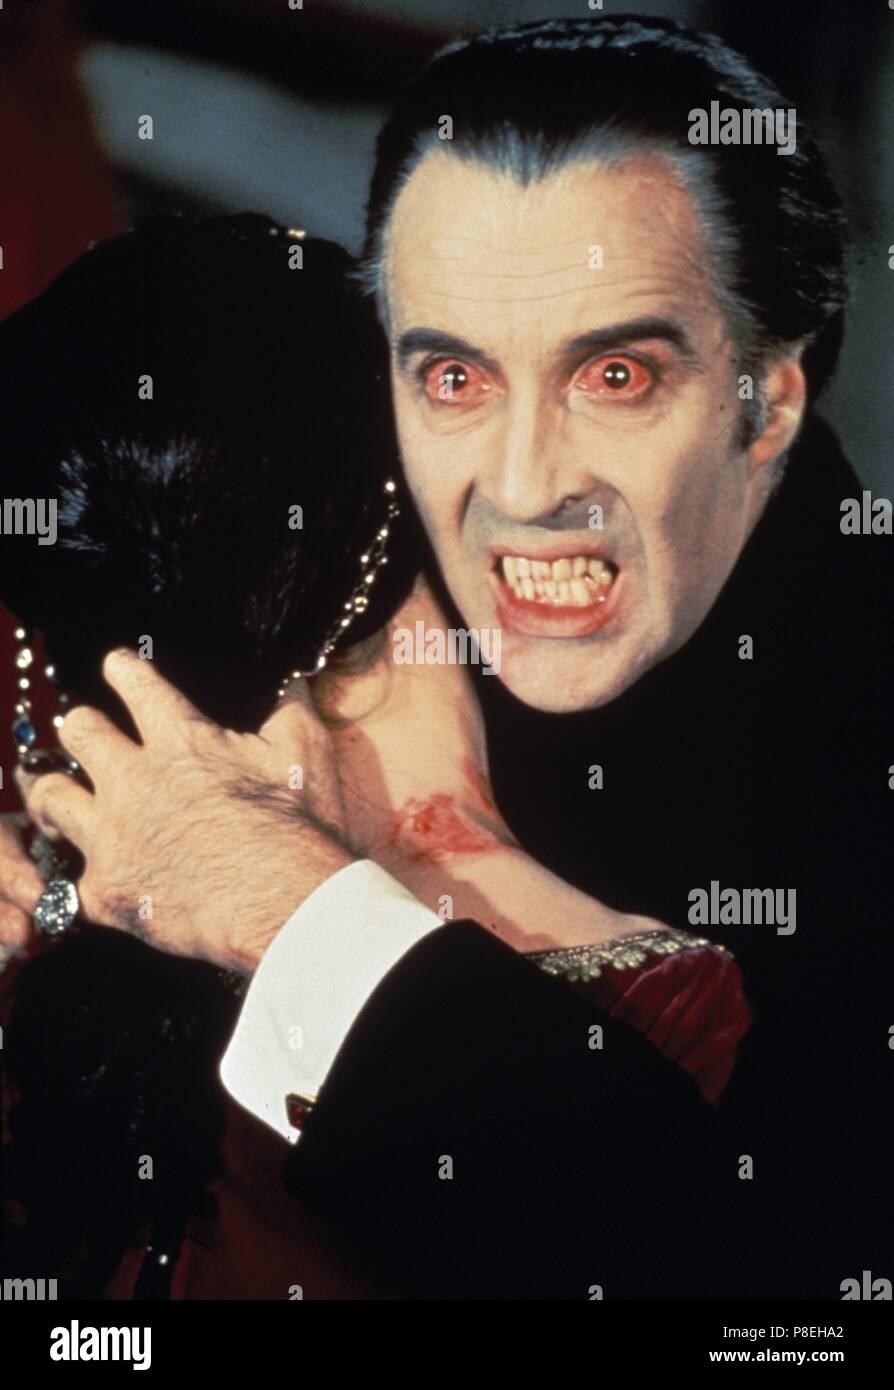 The Many Faces of Christopher Lee (1996) Christopher Lee as Dracula     Date: 1996 Stock Photo